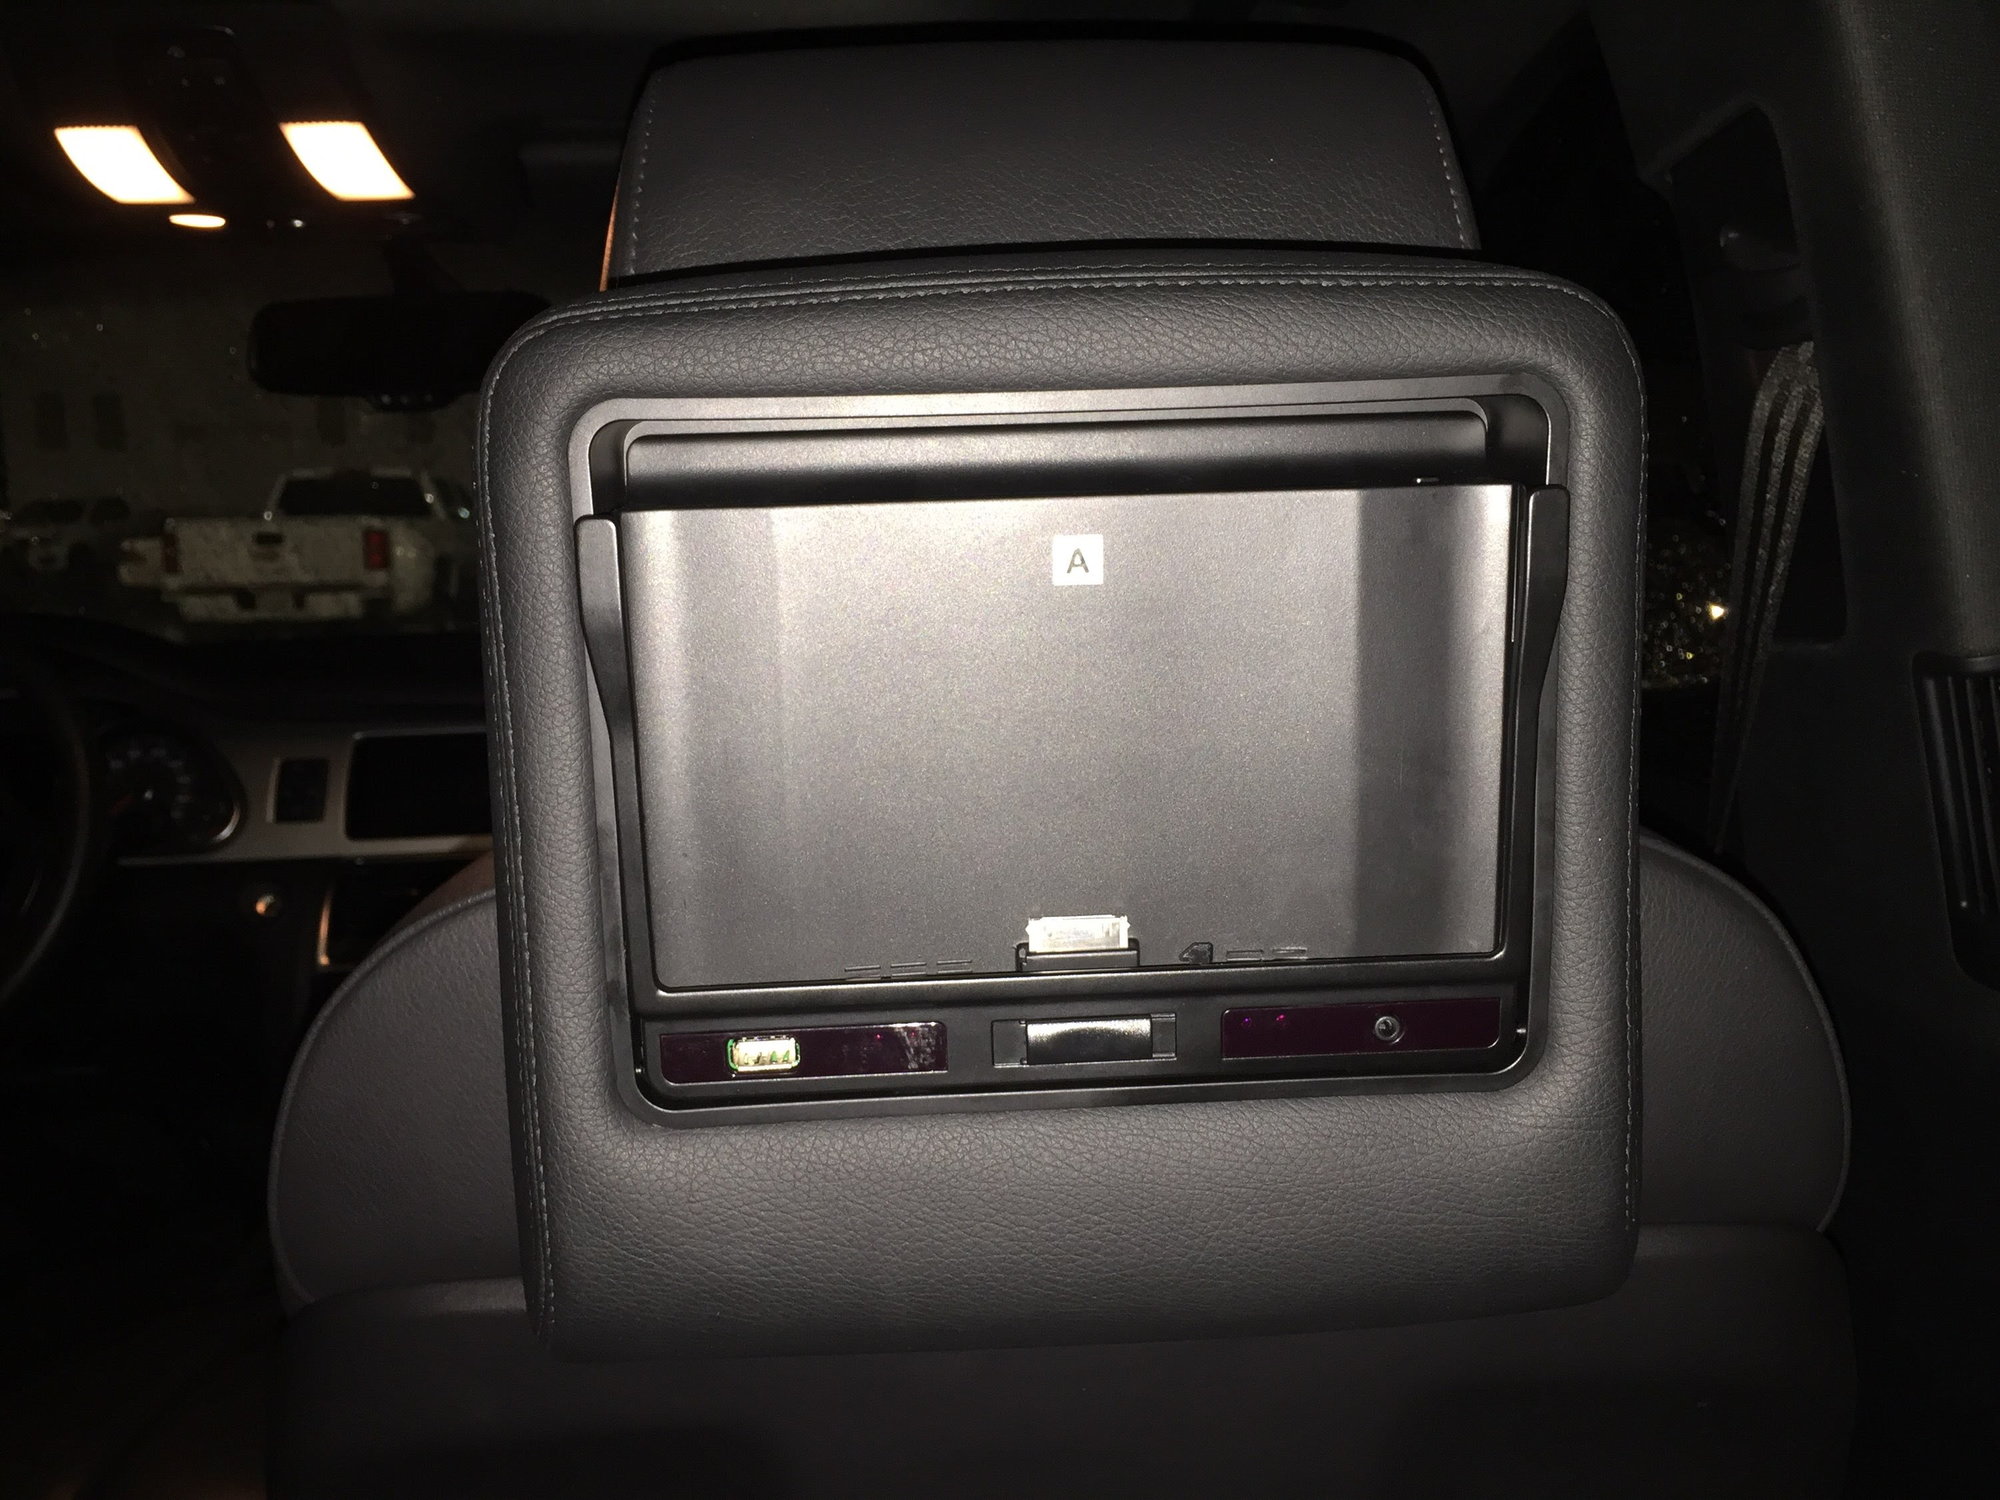 What RSE (rear seat entertainment) unit is this? - AudiWorld Forums